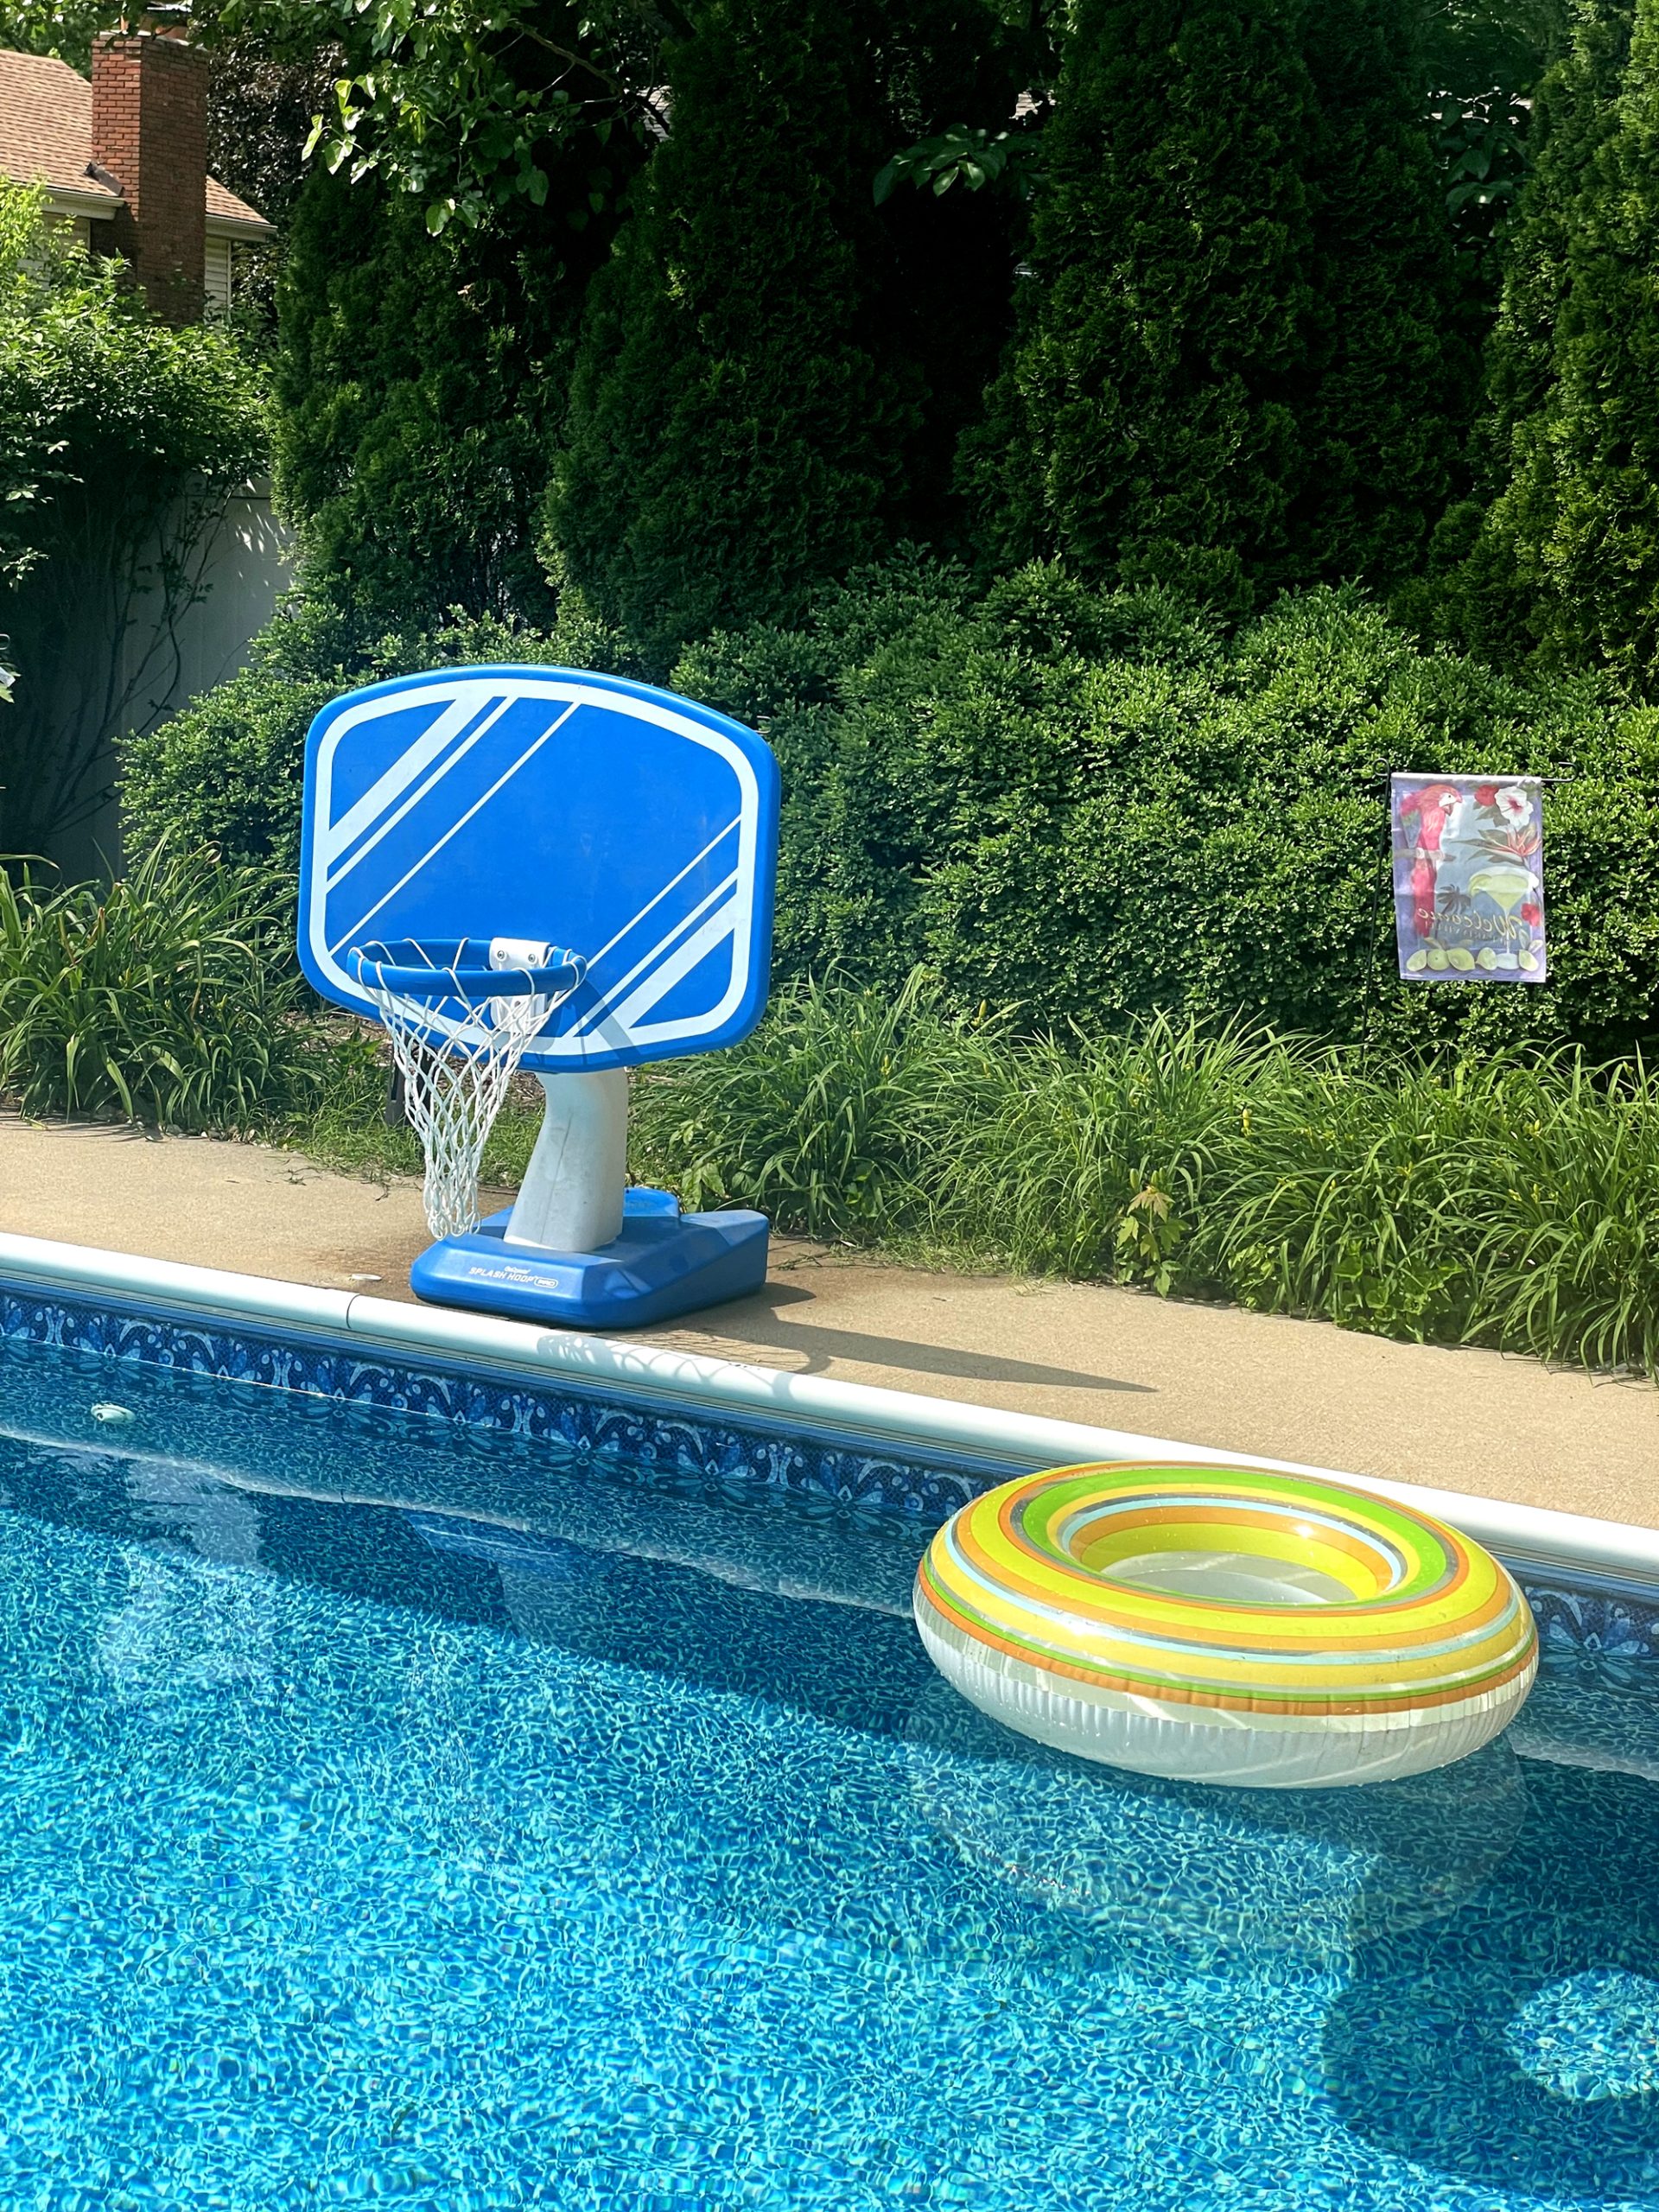 Basketball next to pool with inner tube floating